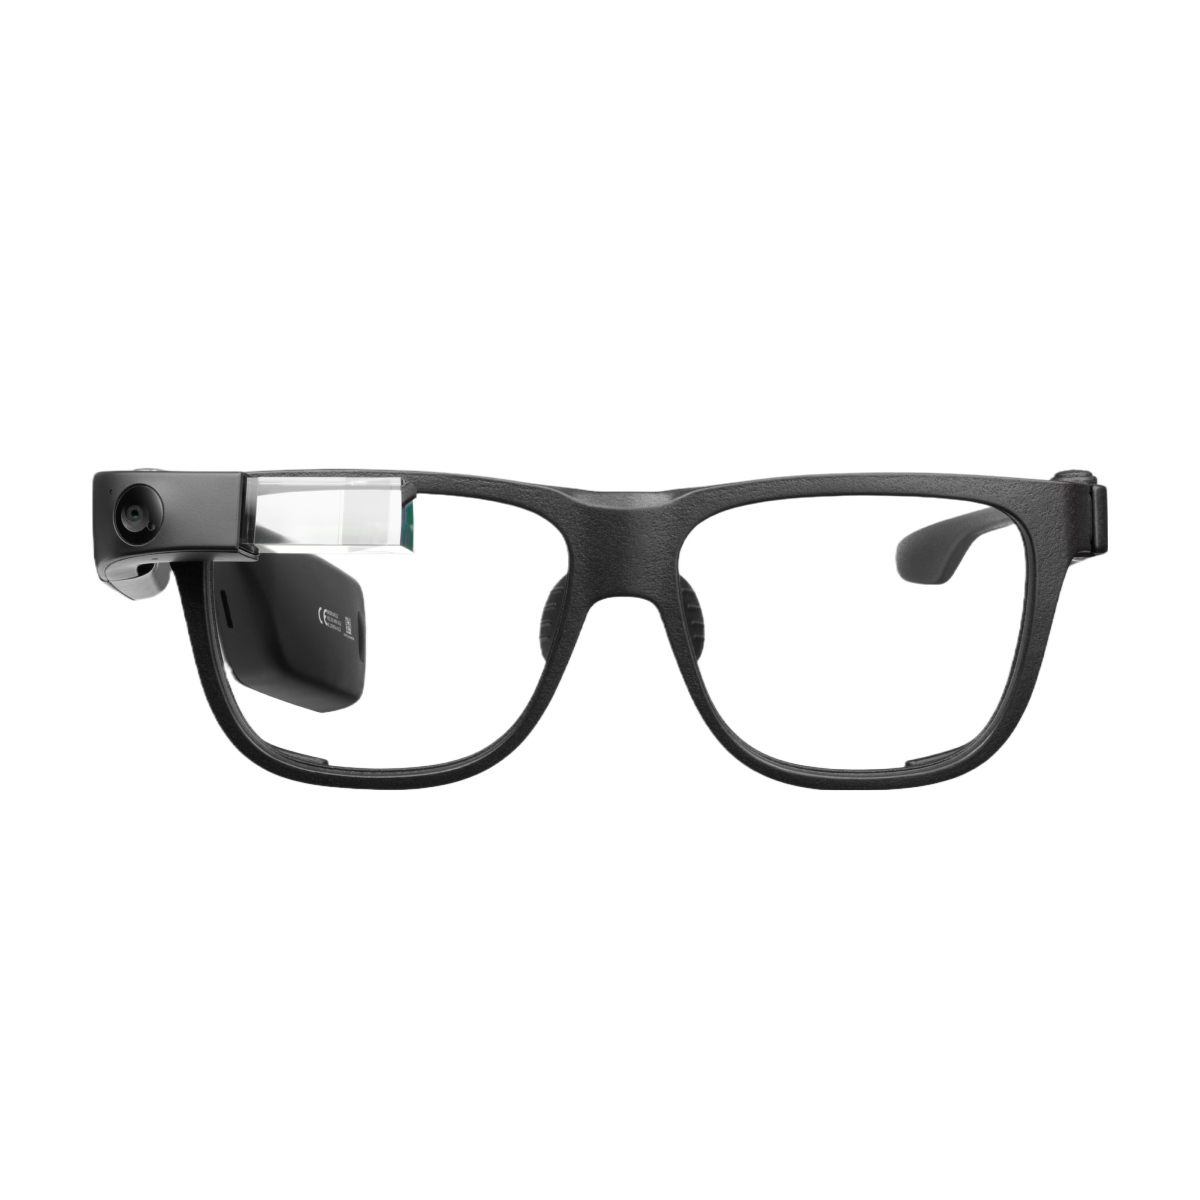 Photo of the Envision Glasses with Smith Optics Frames (Front View)